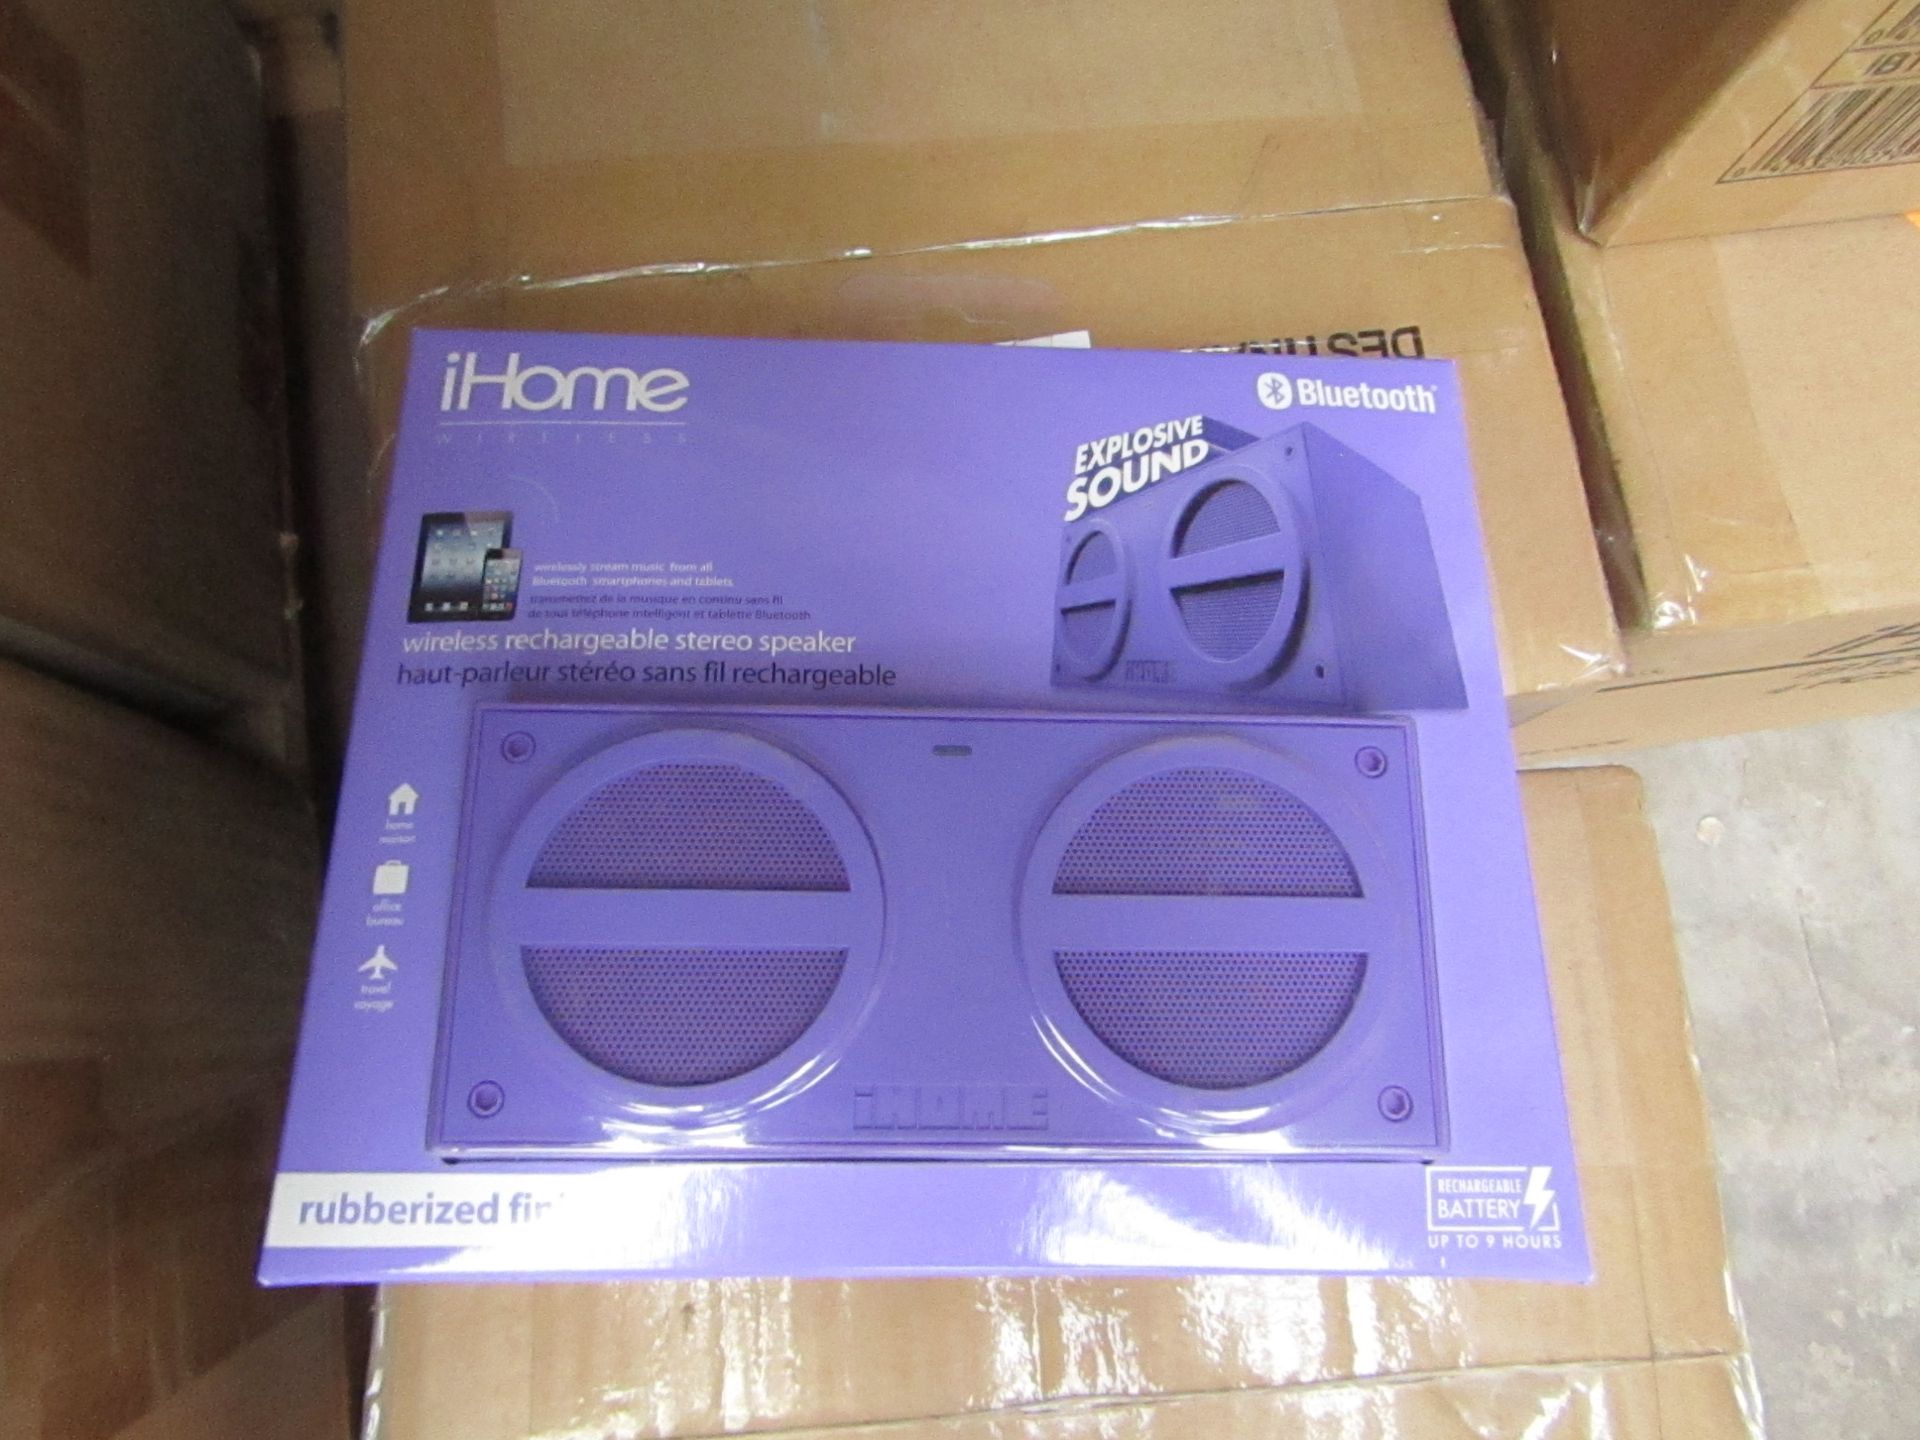 12x iHome wireless Bluetooth stereo speaker, new and packaged.